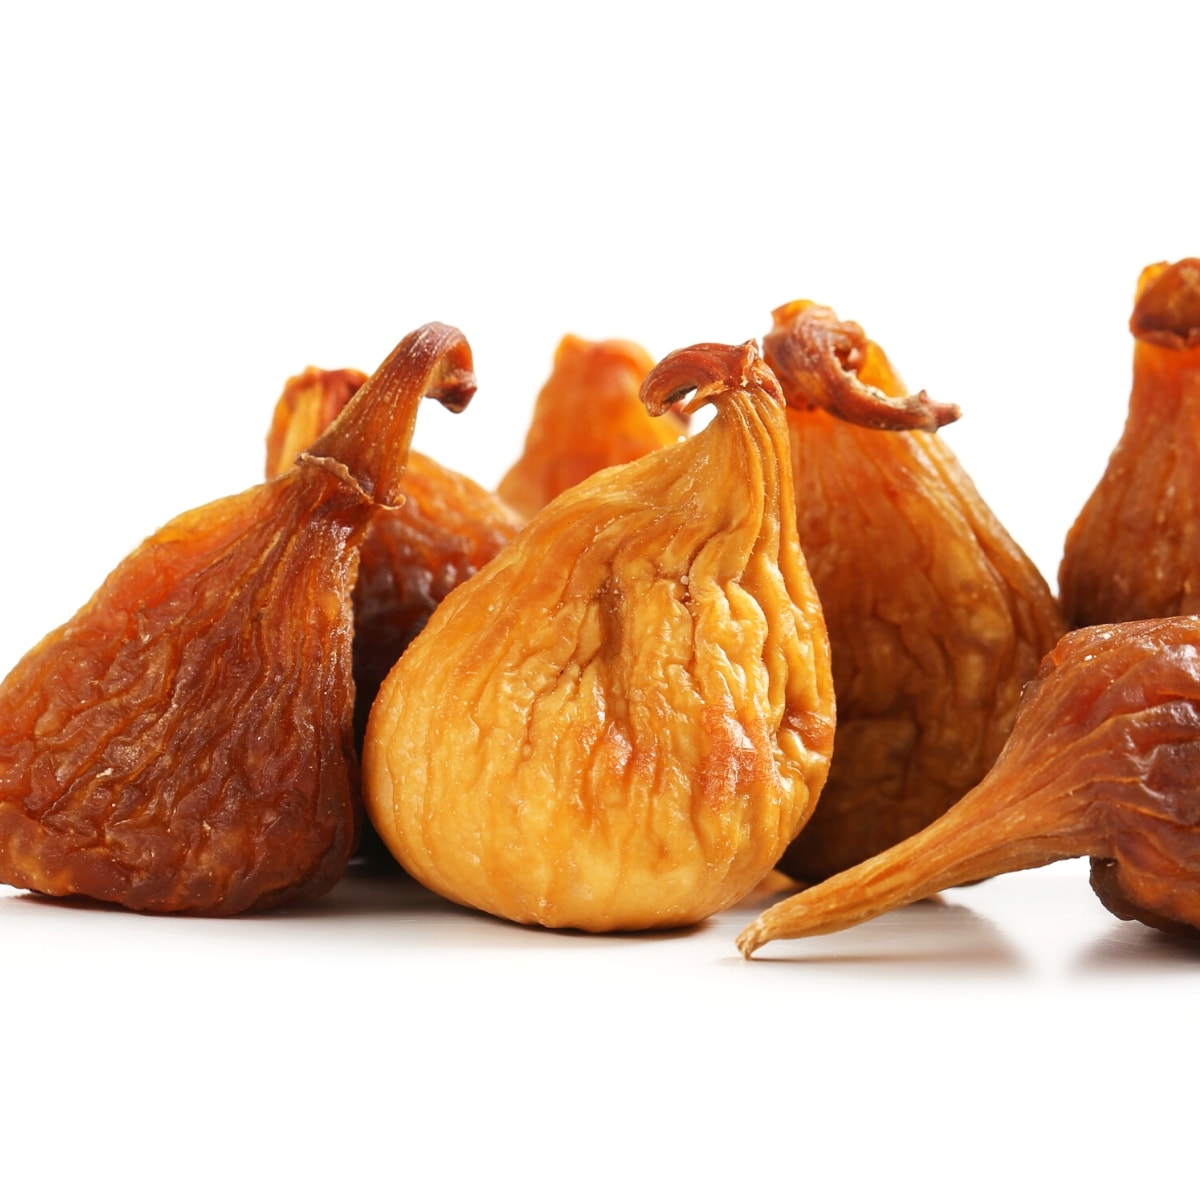 A pile of tan dried figs.